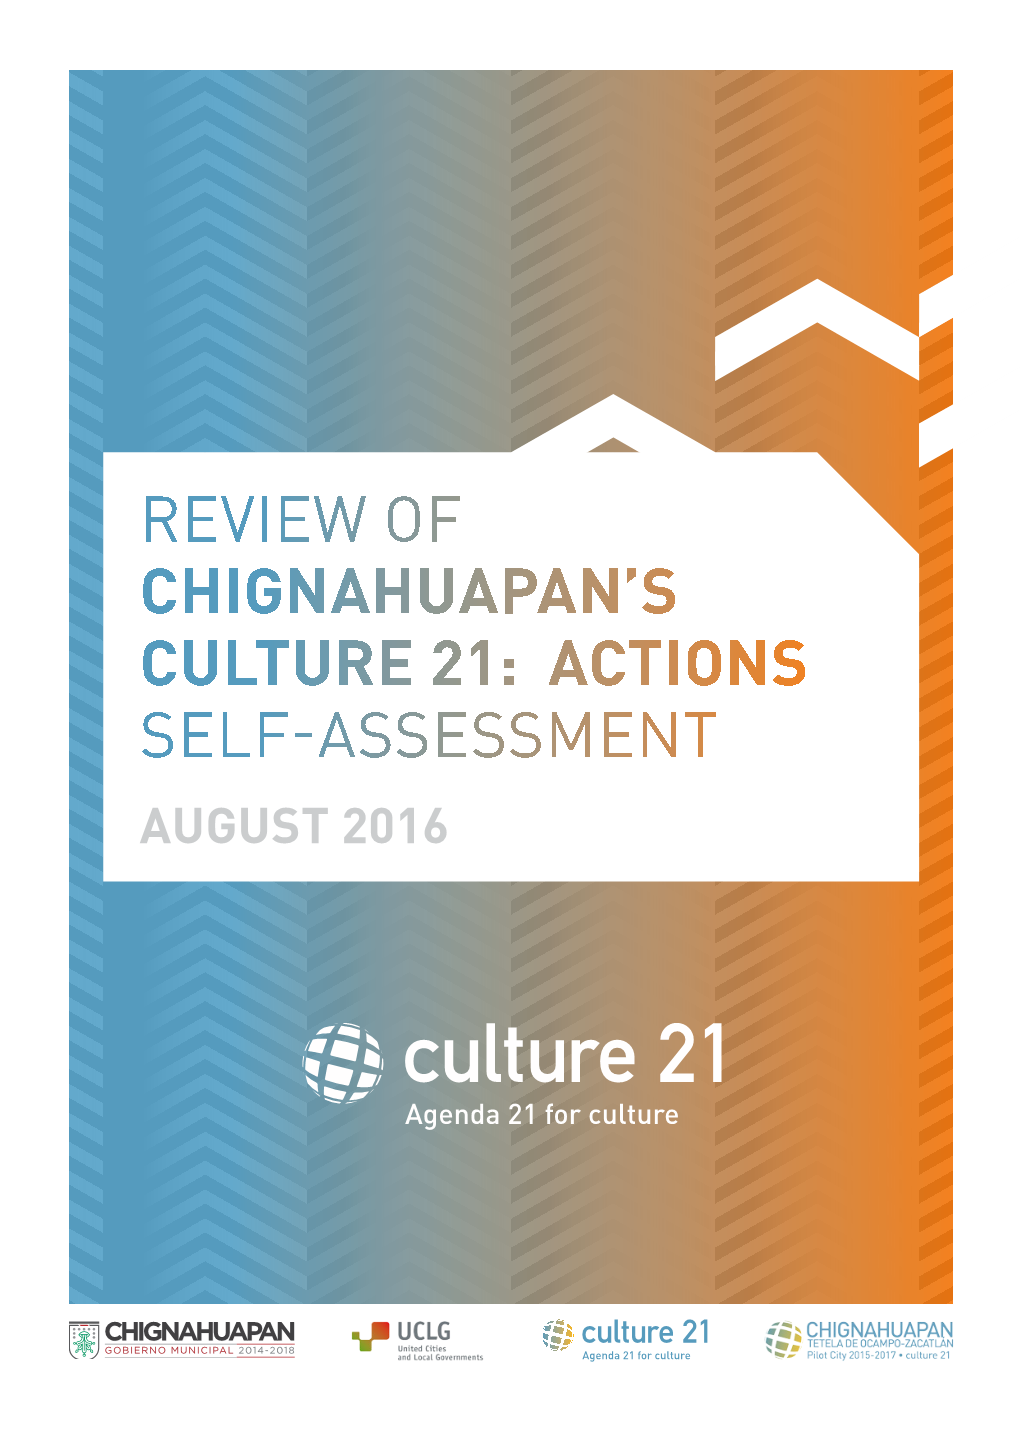 Review of Chignahuapan's Culture 21: Actions Self